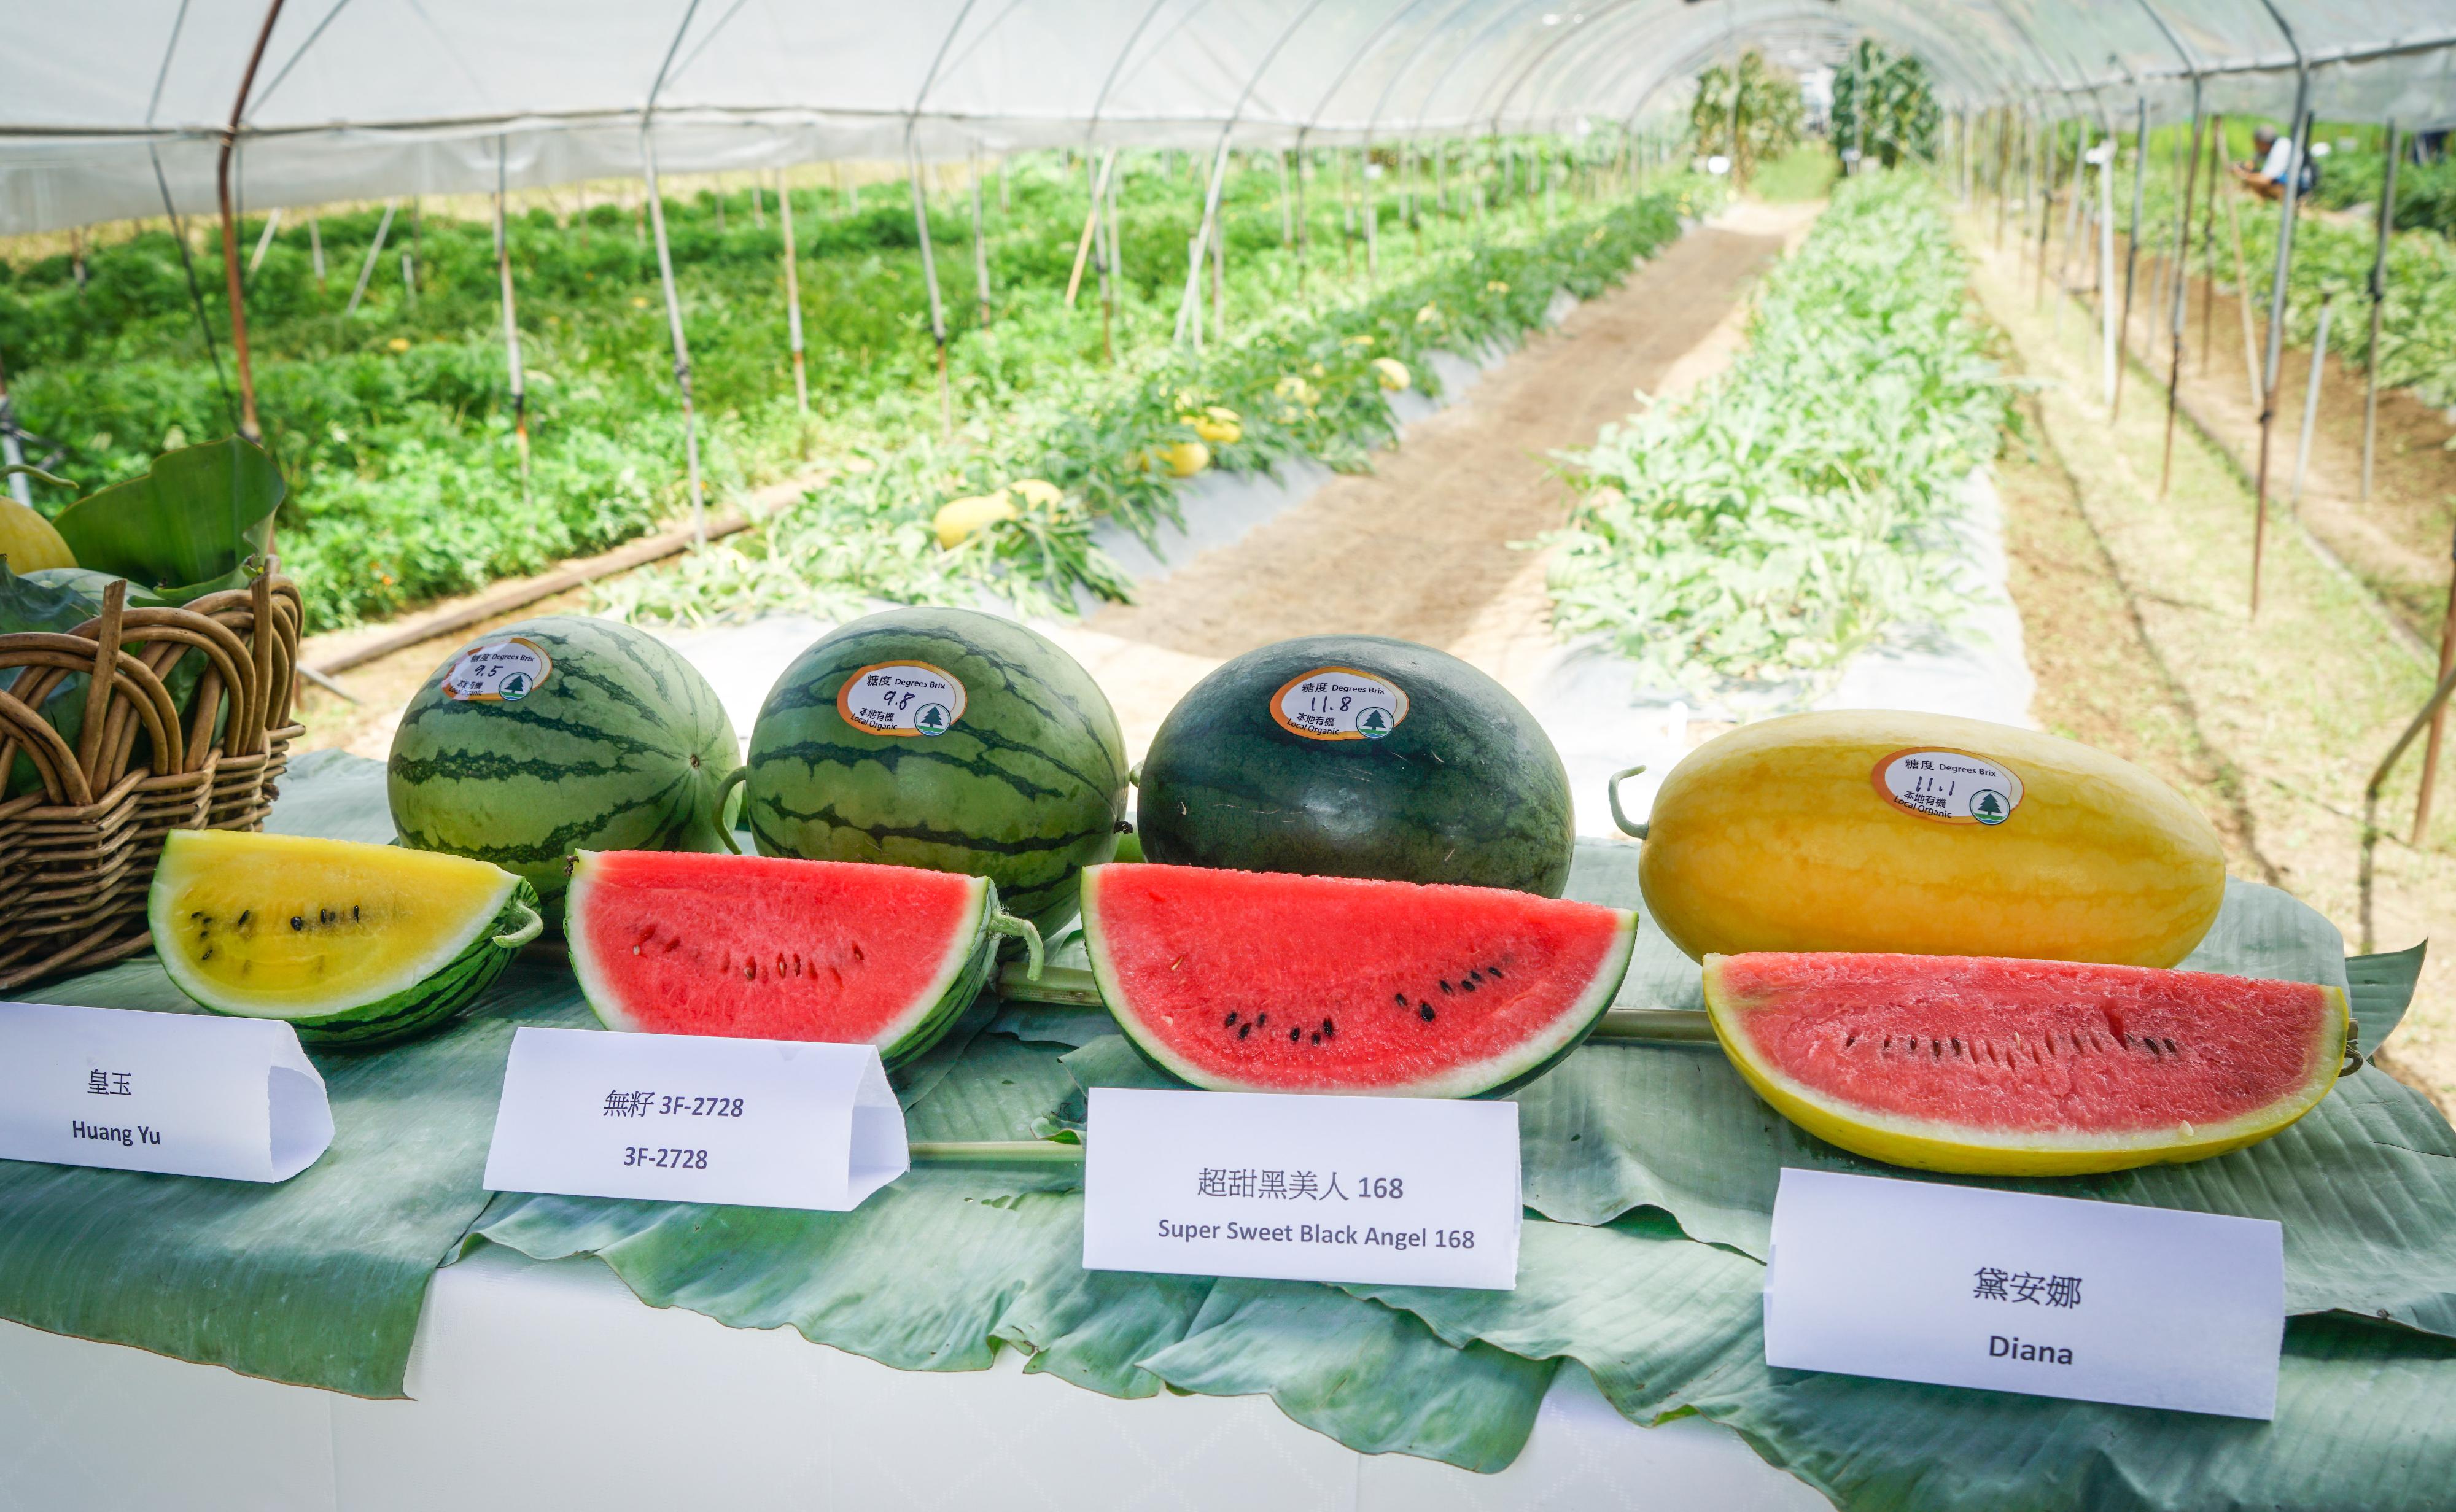 The Agriculture, Fisheries and Conservation Department (AFCD) will hold the Local Organic Watermelon Festival 2023, which is the first event of the Happy Hong Kong - A and F Carnival, from June 22. The AFCD today (June 19) introduced four highlighted varieties of organic watermelons for the occasion. Photo shows those varieties with sweetness labels, namely (from left) Huang Yu, seedless 3F-2728, Super Sweet Black Angel 168 and Diana.